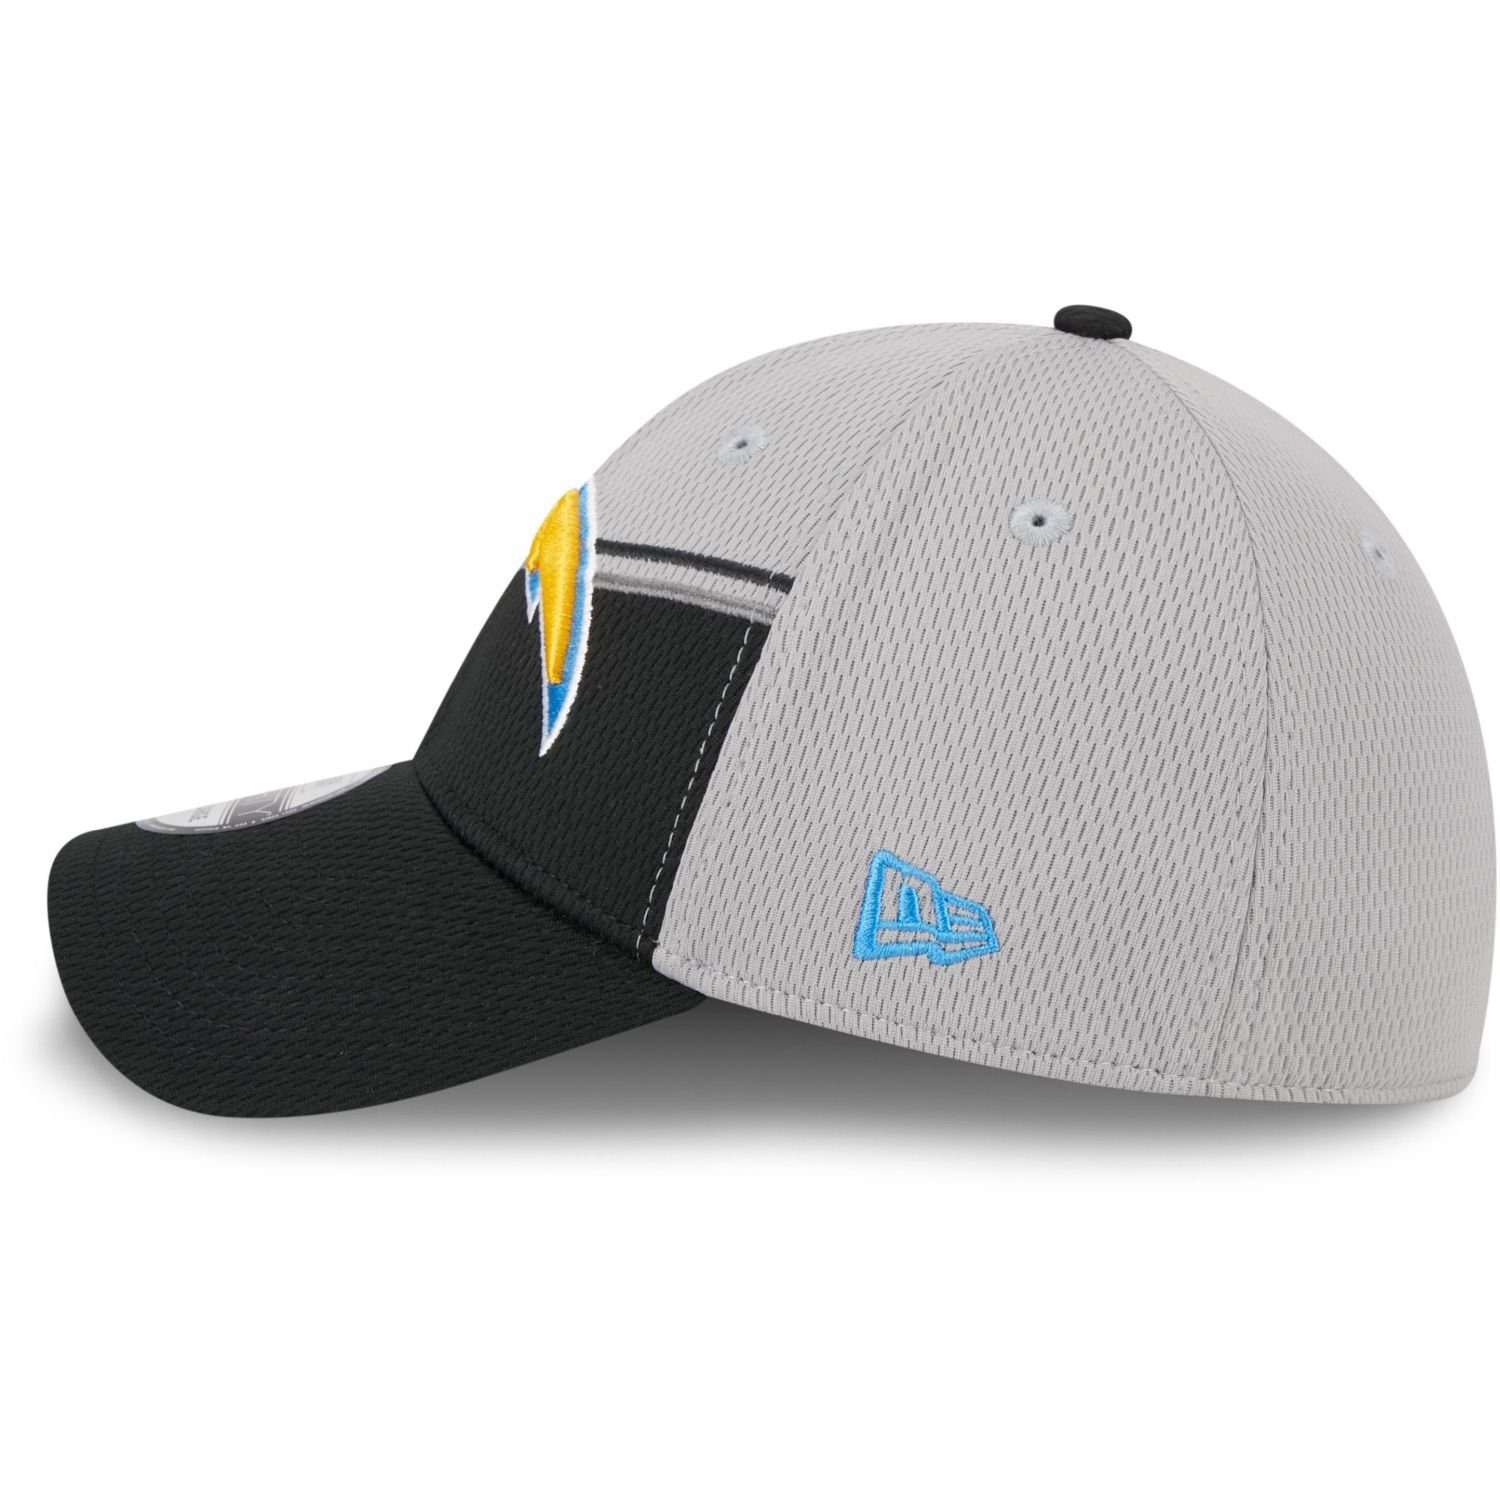 New Angeles Los Flex Chargers Cap Era 2023 SIDELINE 39Thirty